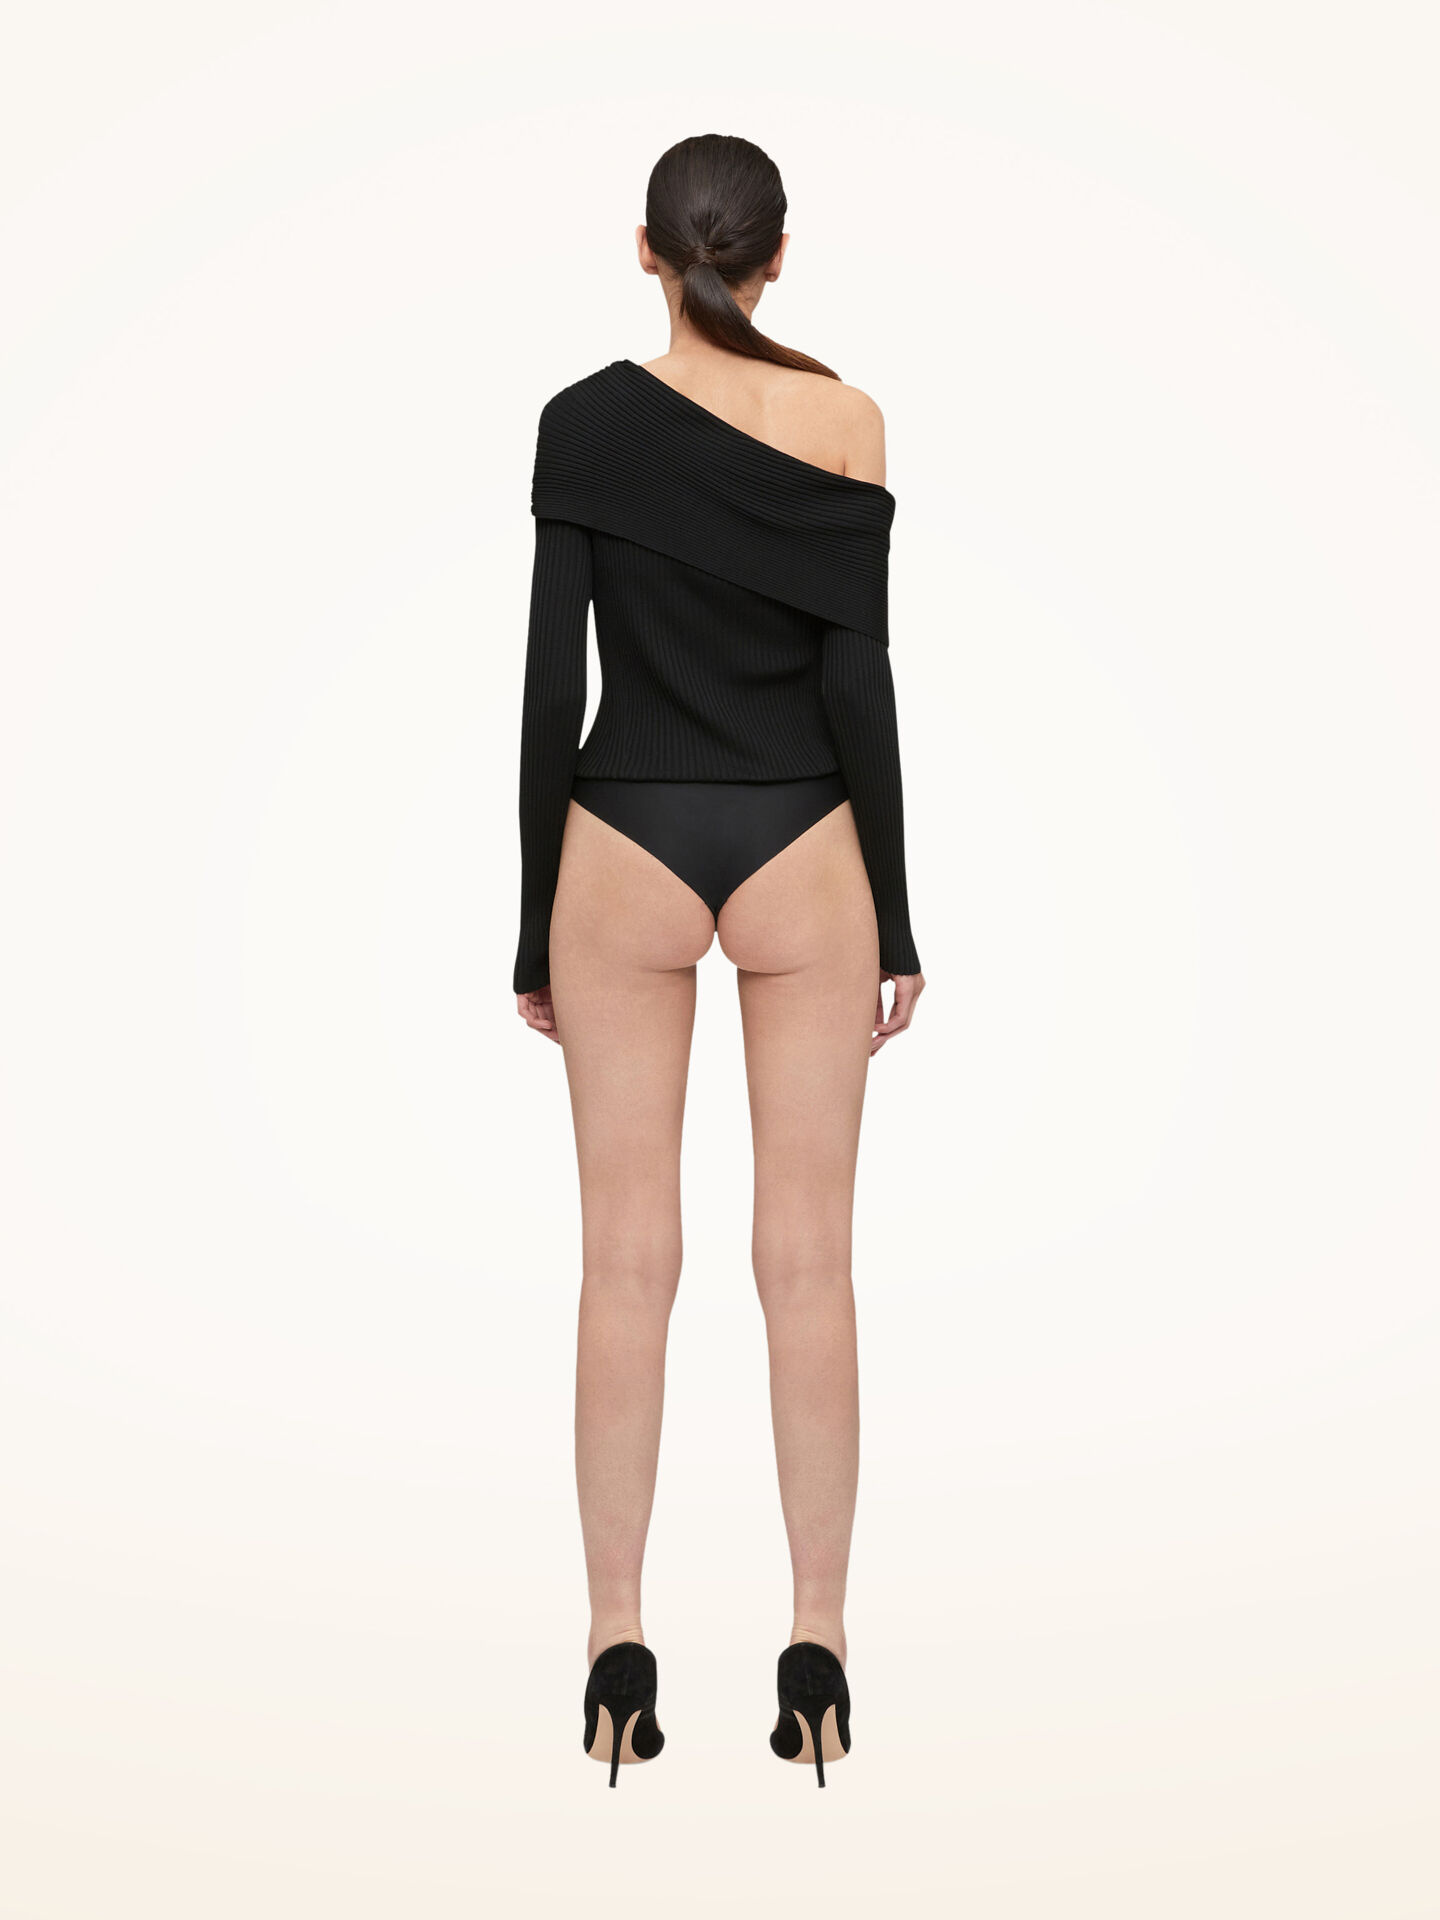 WOLFORD 79290 Contoured Ribs Body